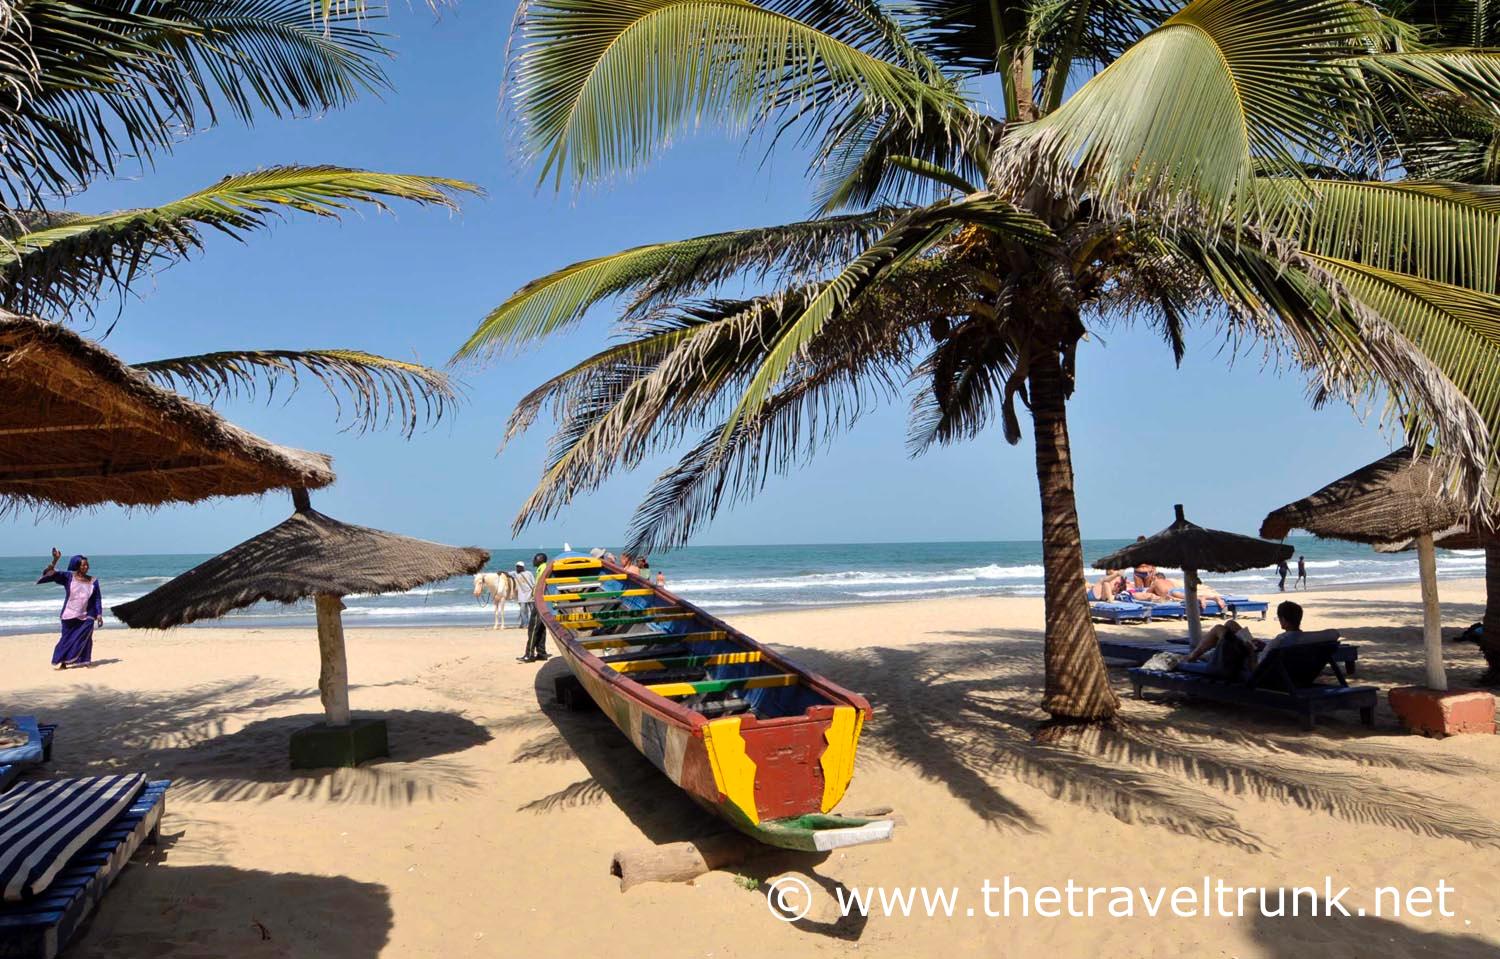 Winter sun destination of The Gambia, West Africa..